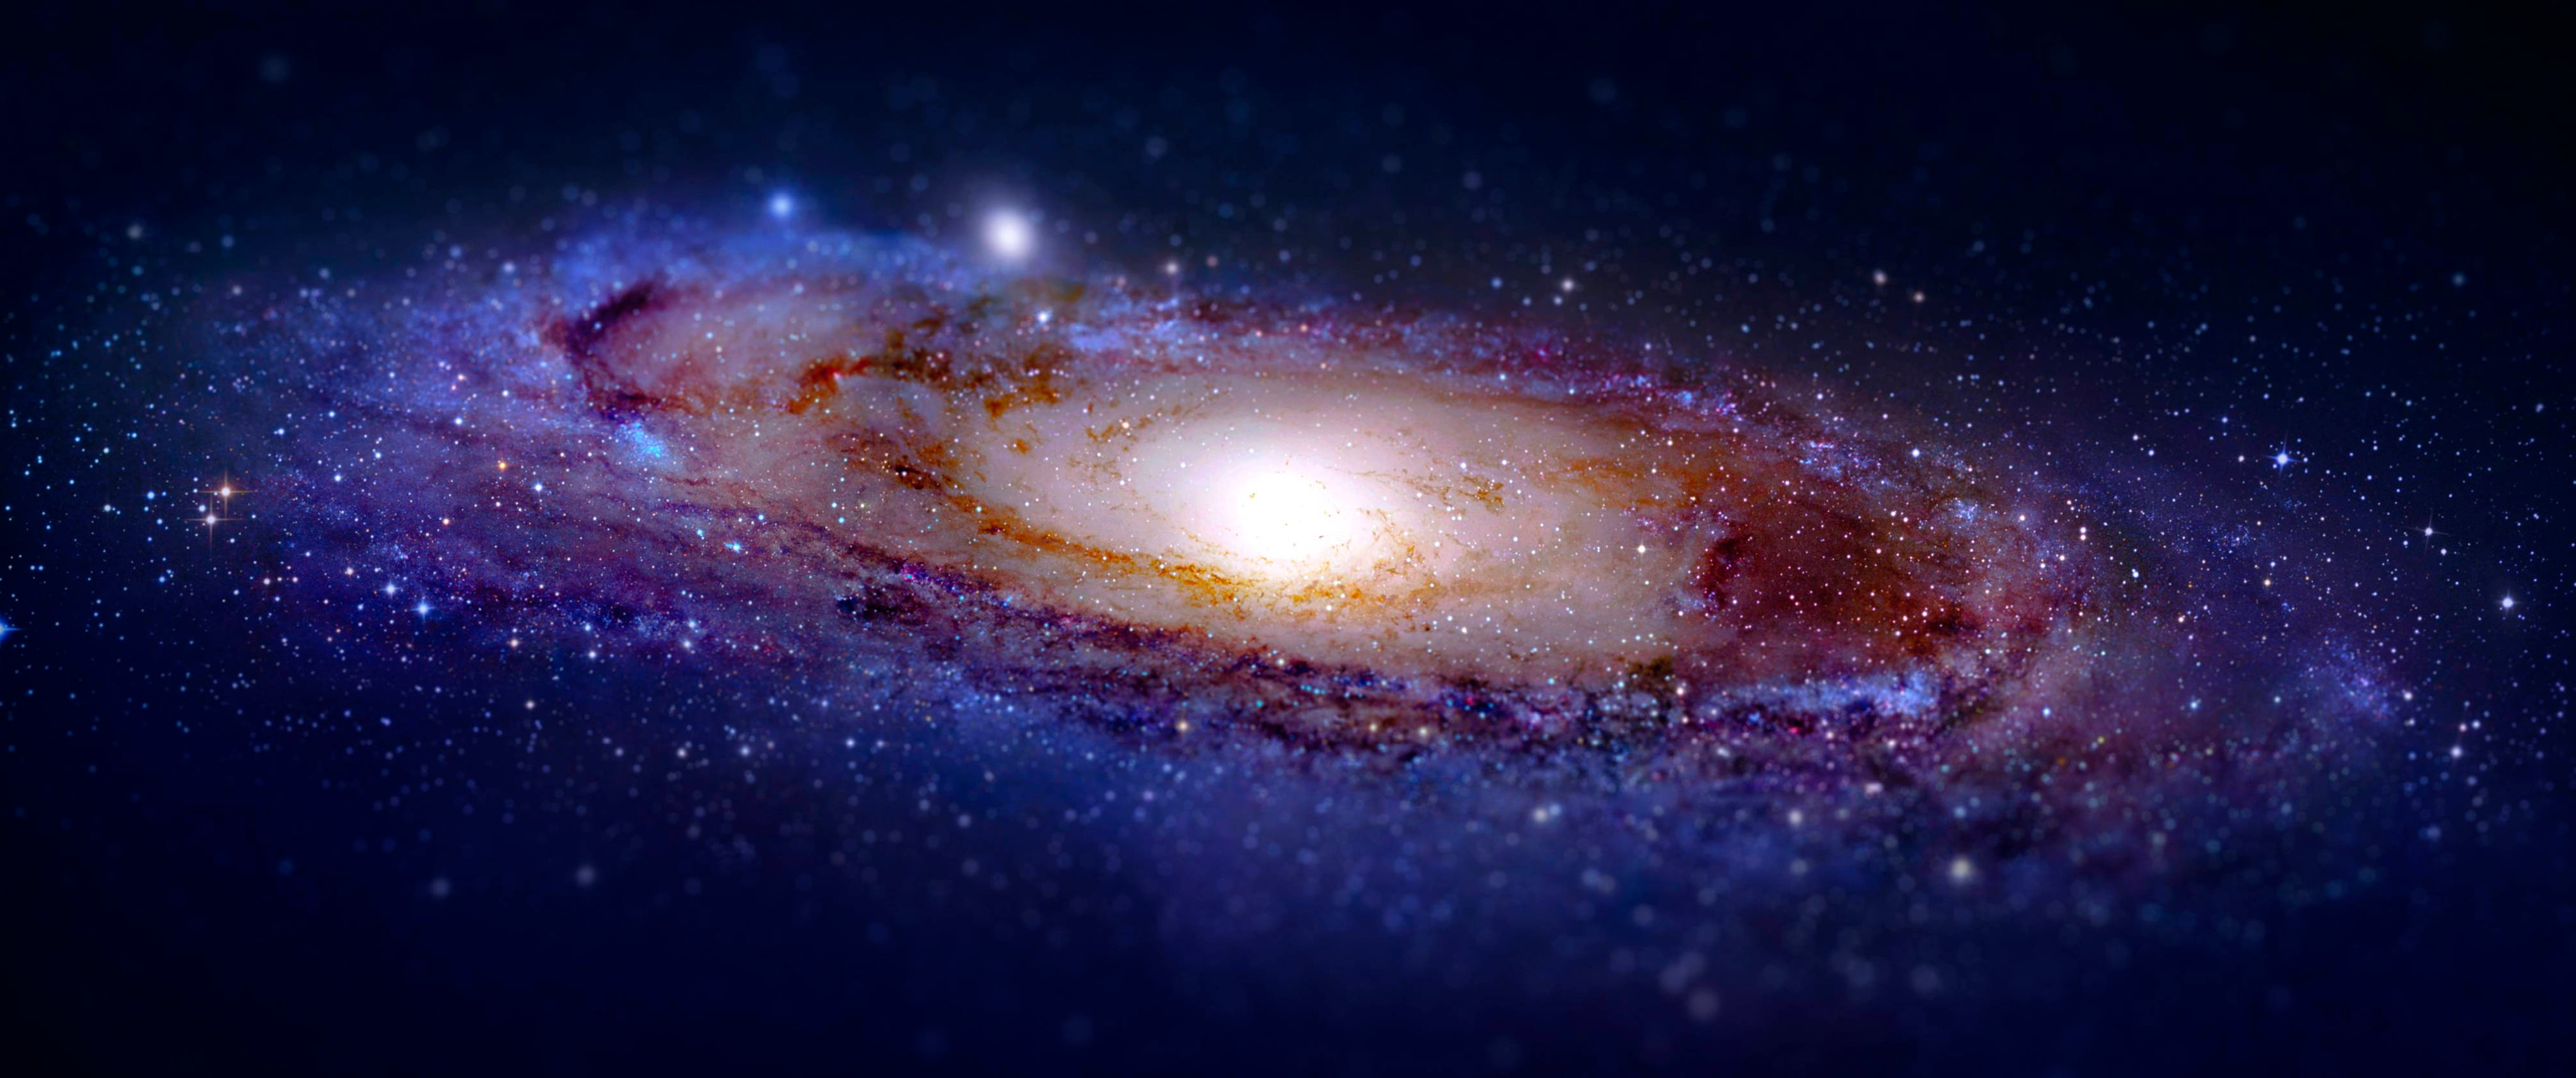 Free download Galaxy Wallpaper Png 57 images [3440x1440] for your